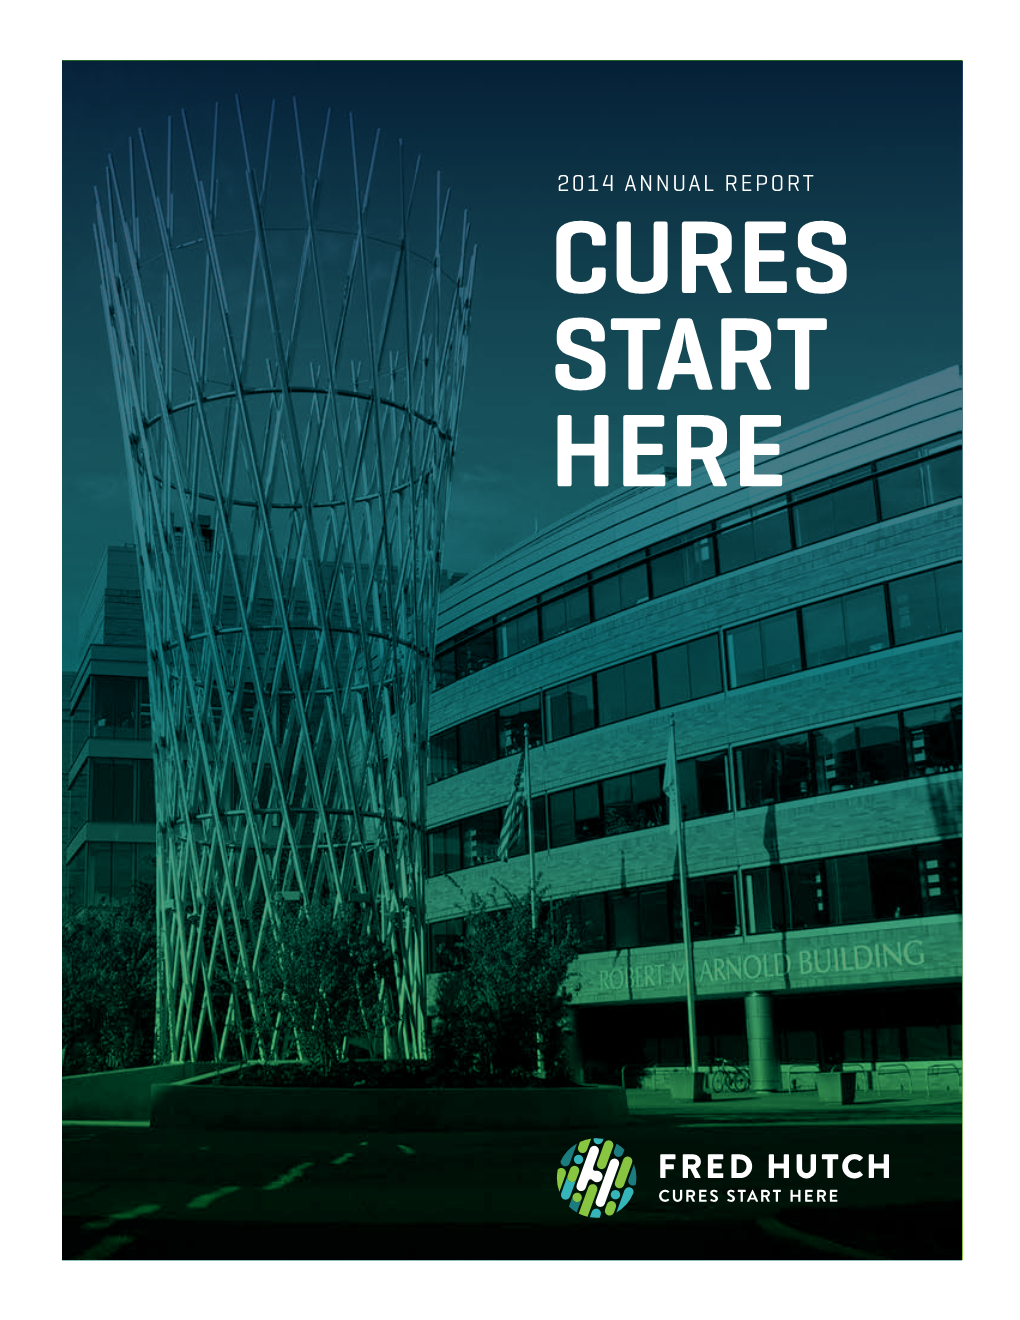 2014 Annual Report: Cures Start Here